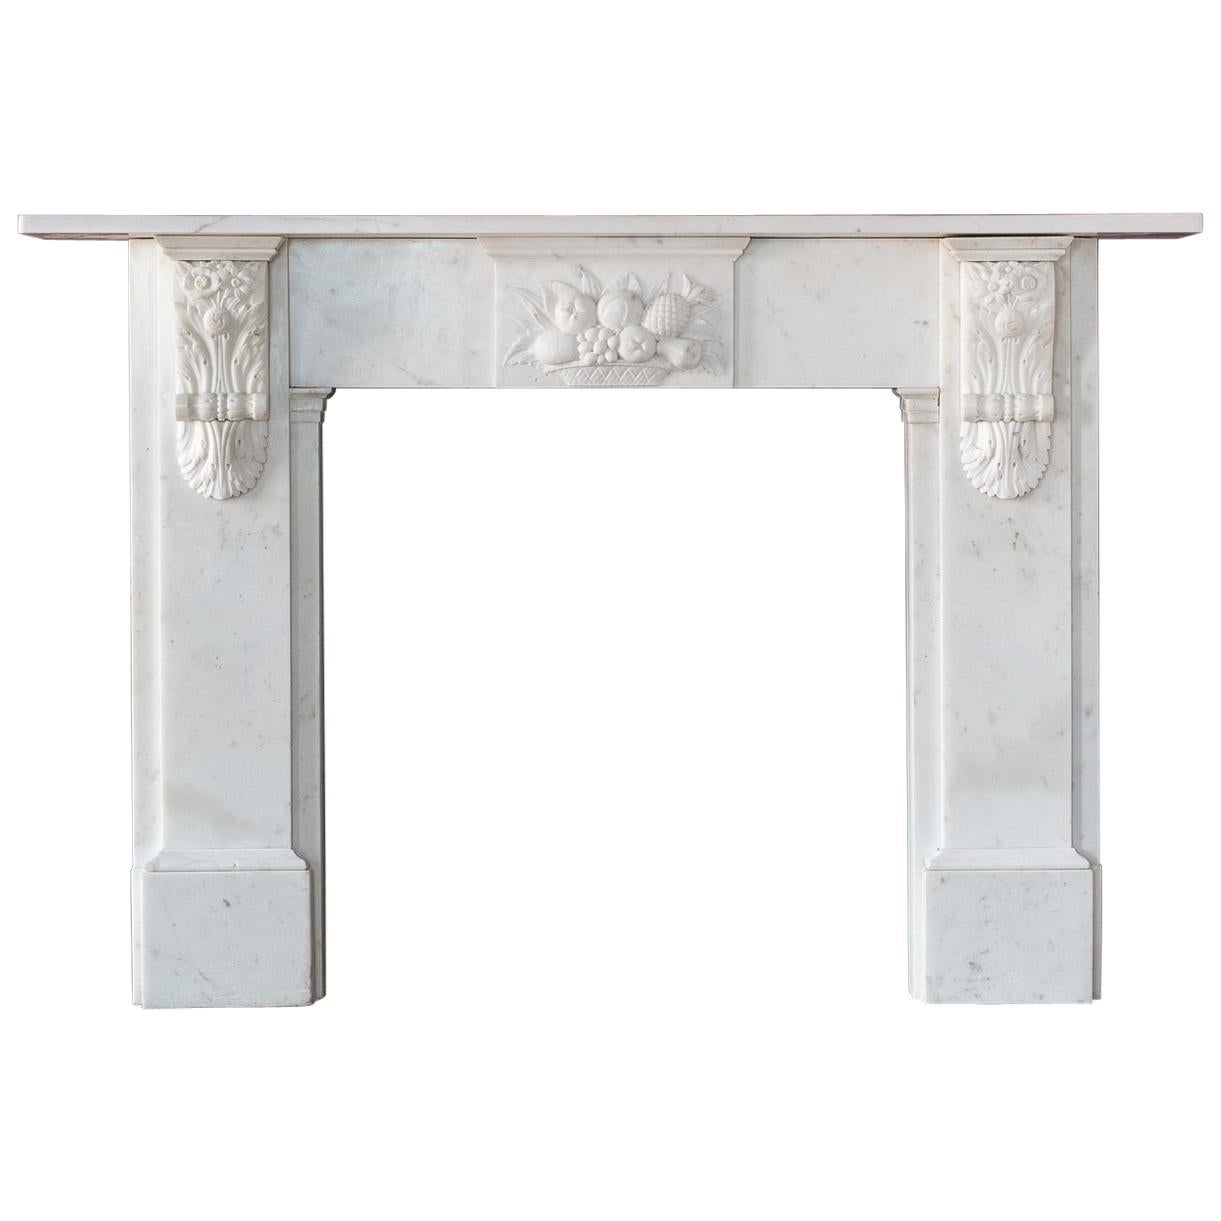 Early Victorian Statuary Marble Fireplace